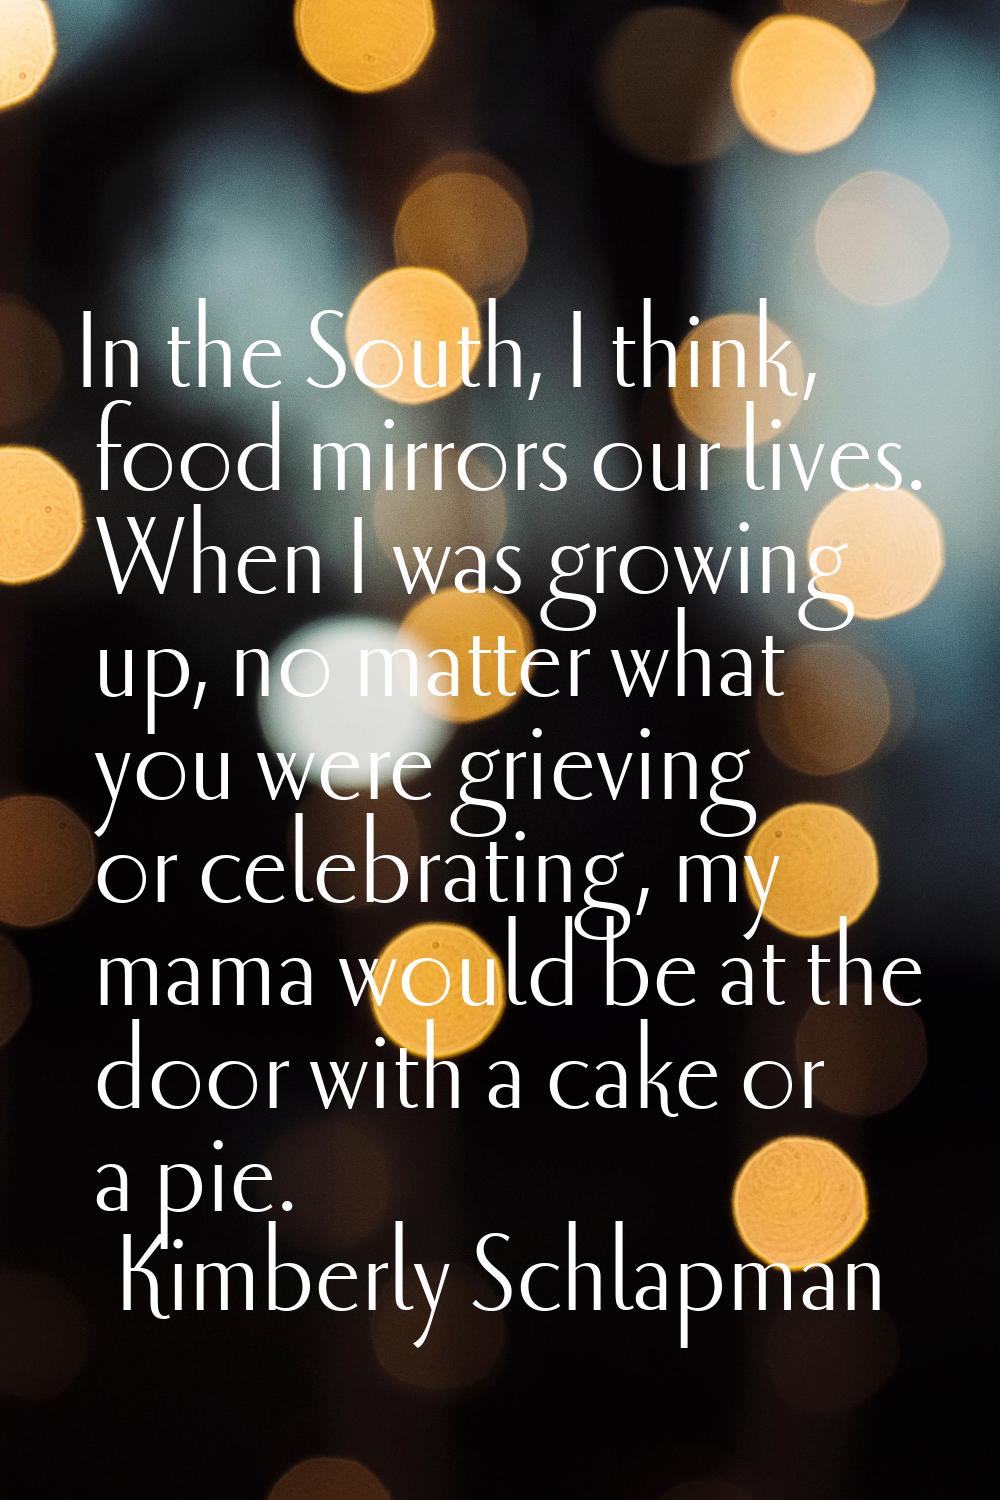 In the South, I think, food mirrors our lives. When I was growing up, no matter what you were griev